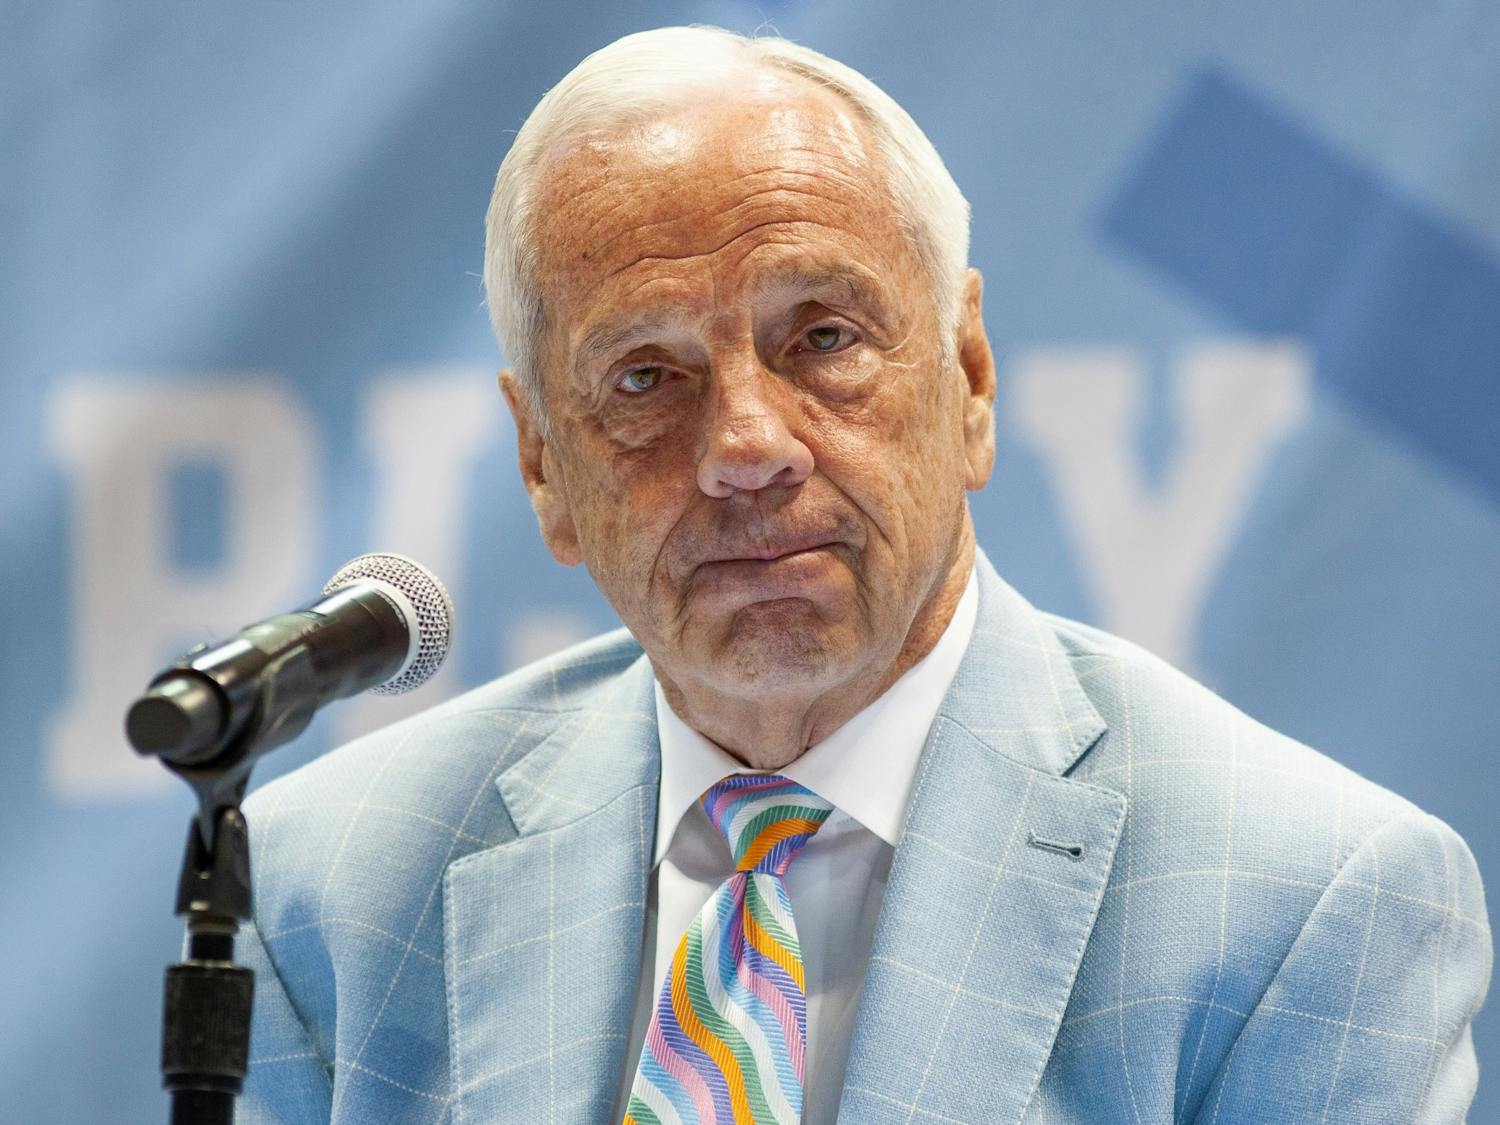 UNC head coach Roy Williams tears up during his retirement announcement  press conference in the Smith Center on April 1, 2021. "I no longer feel that I am the right man for the job," said Williams on the decision.